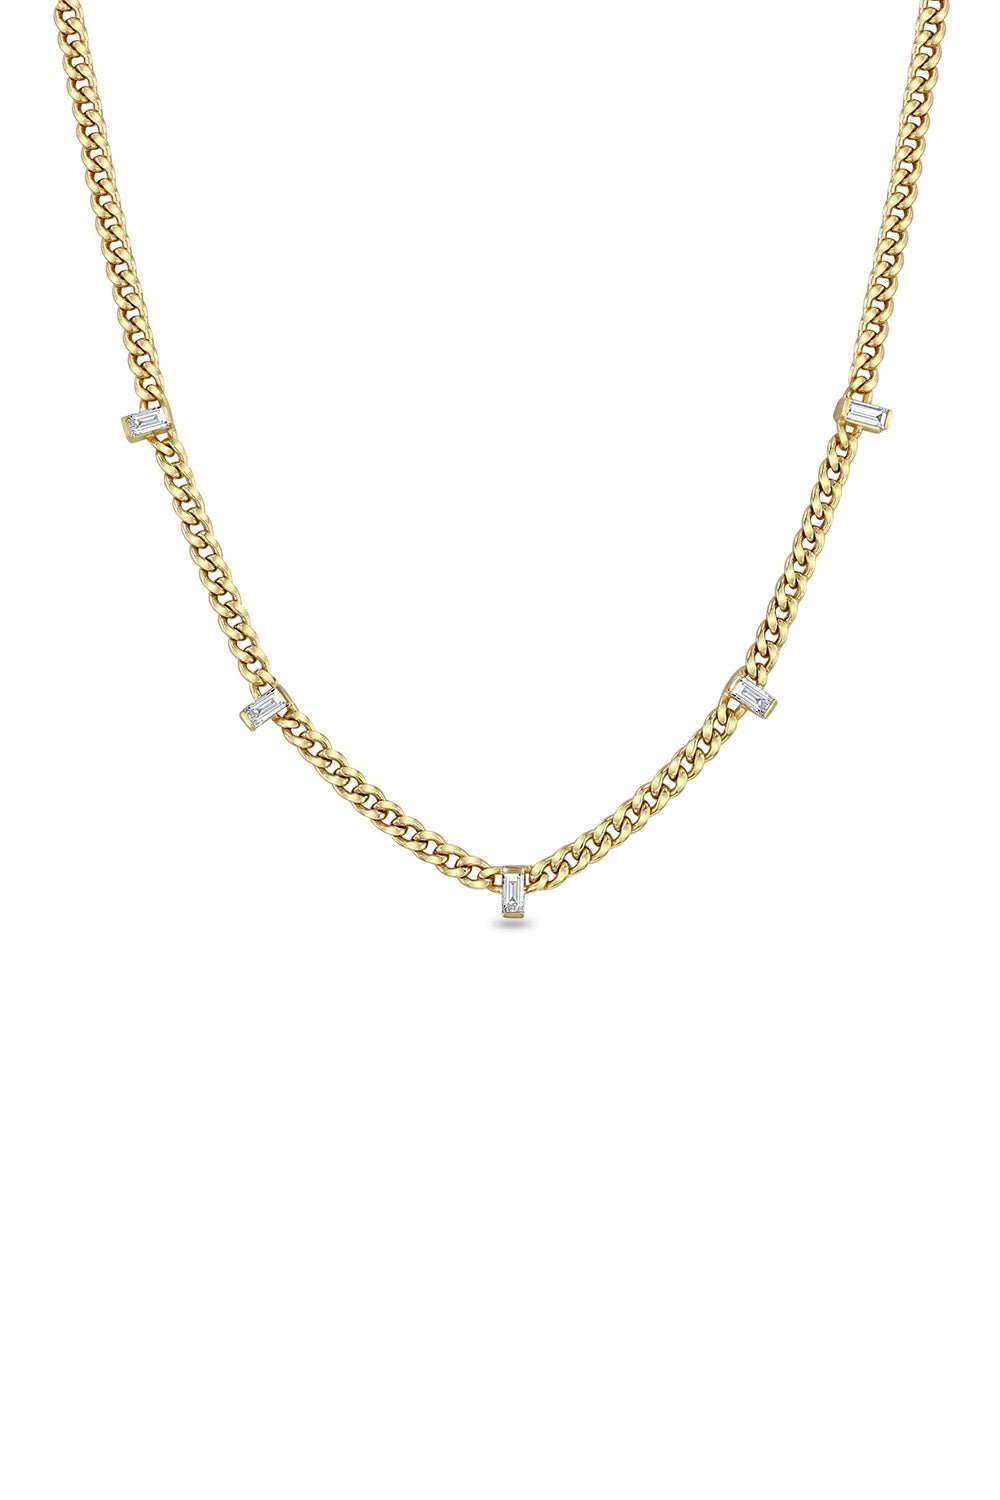 ZOE CHICCO-Small Baguette Curb Chain-YELLOW GOLD